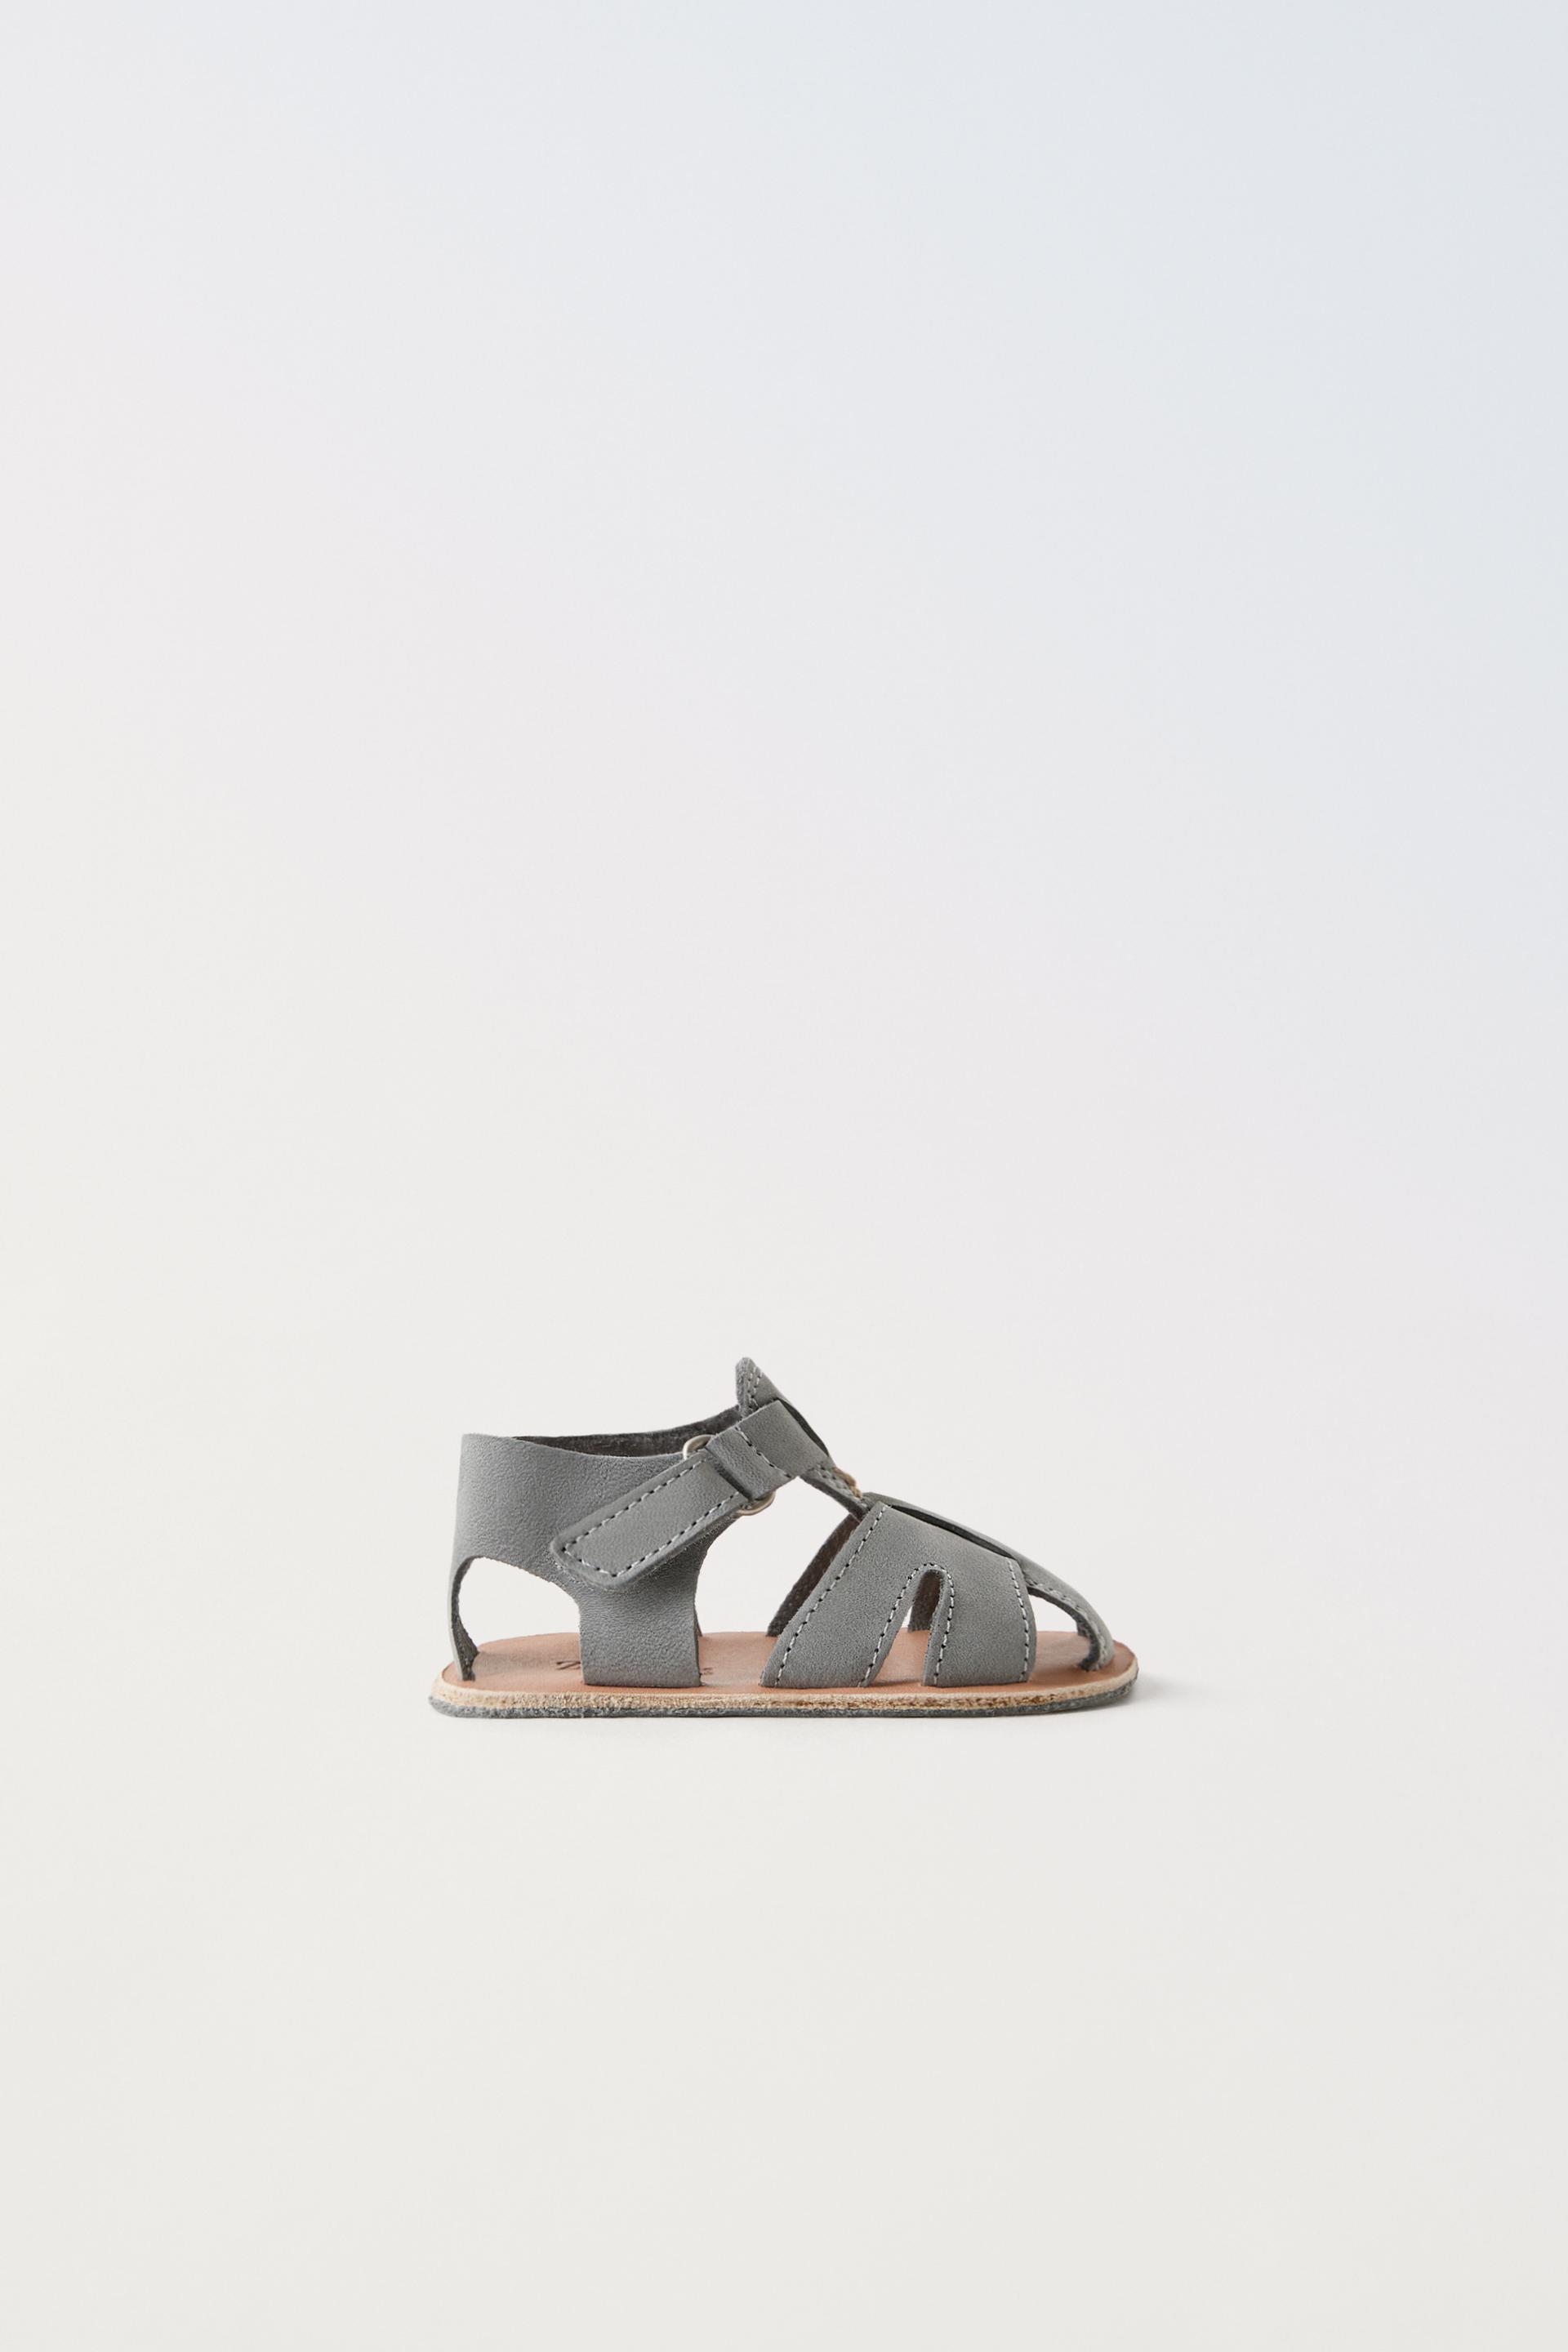 LEATHER CAGE SANDALS ZARA